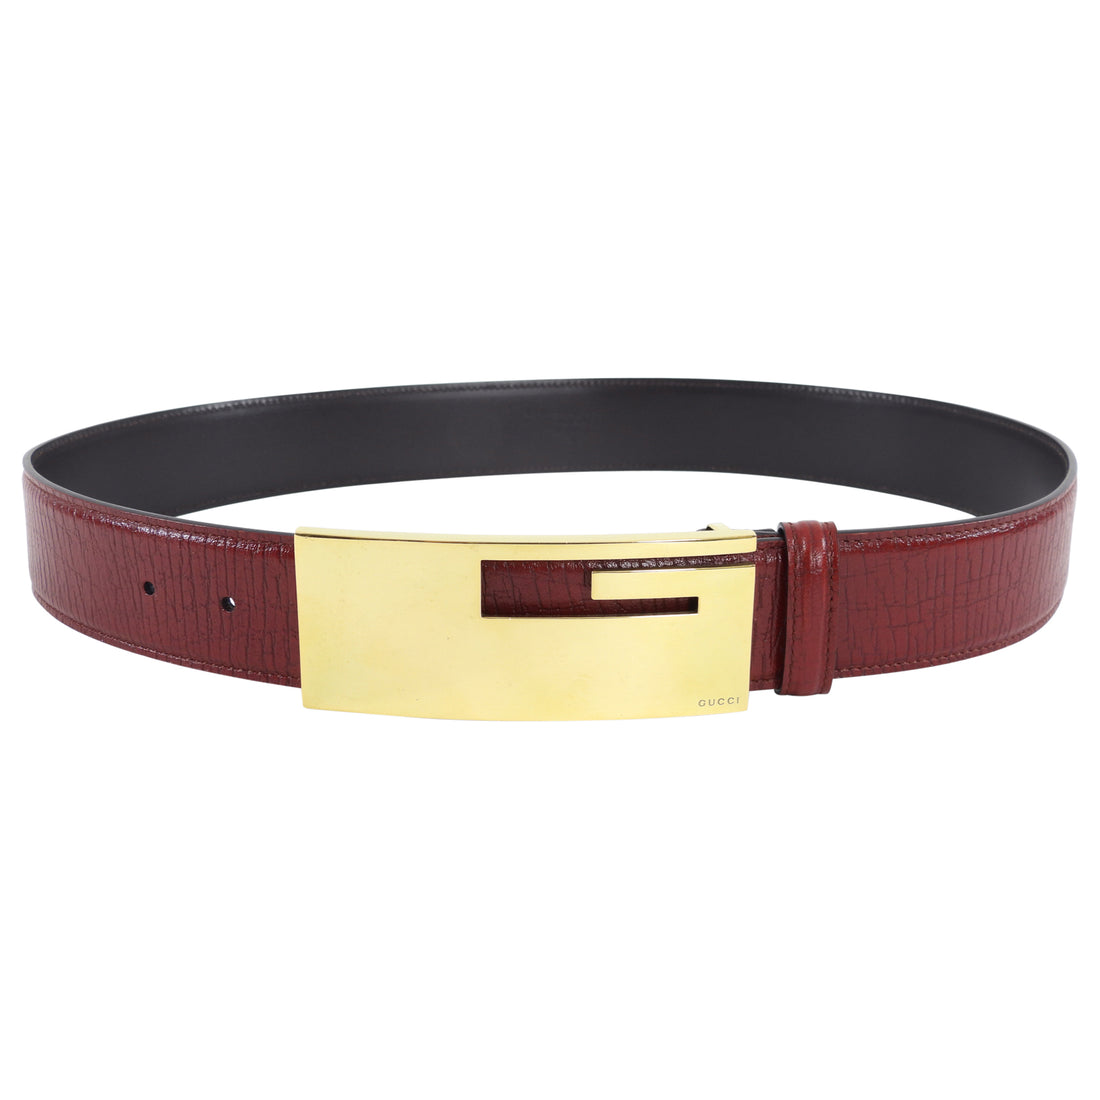 Gucci Tom Ford Red Gold G Buckle Leather Belt - 32-34”